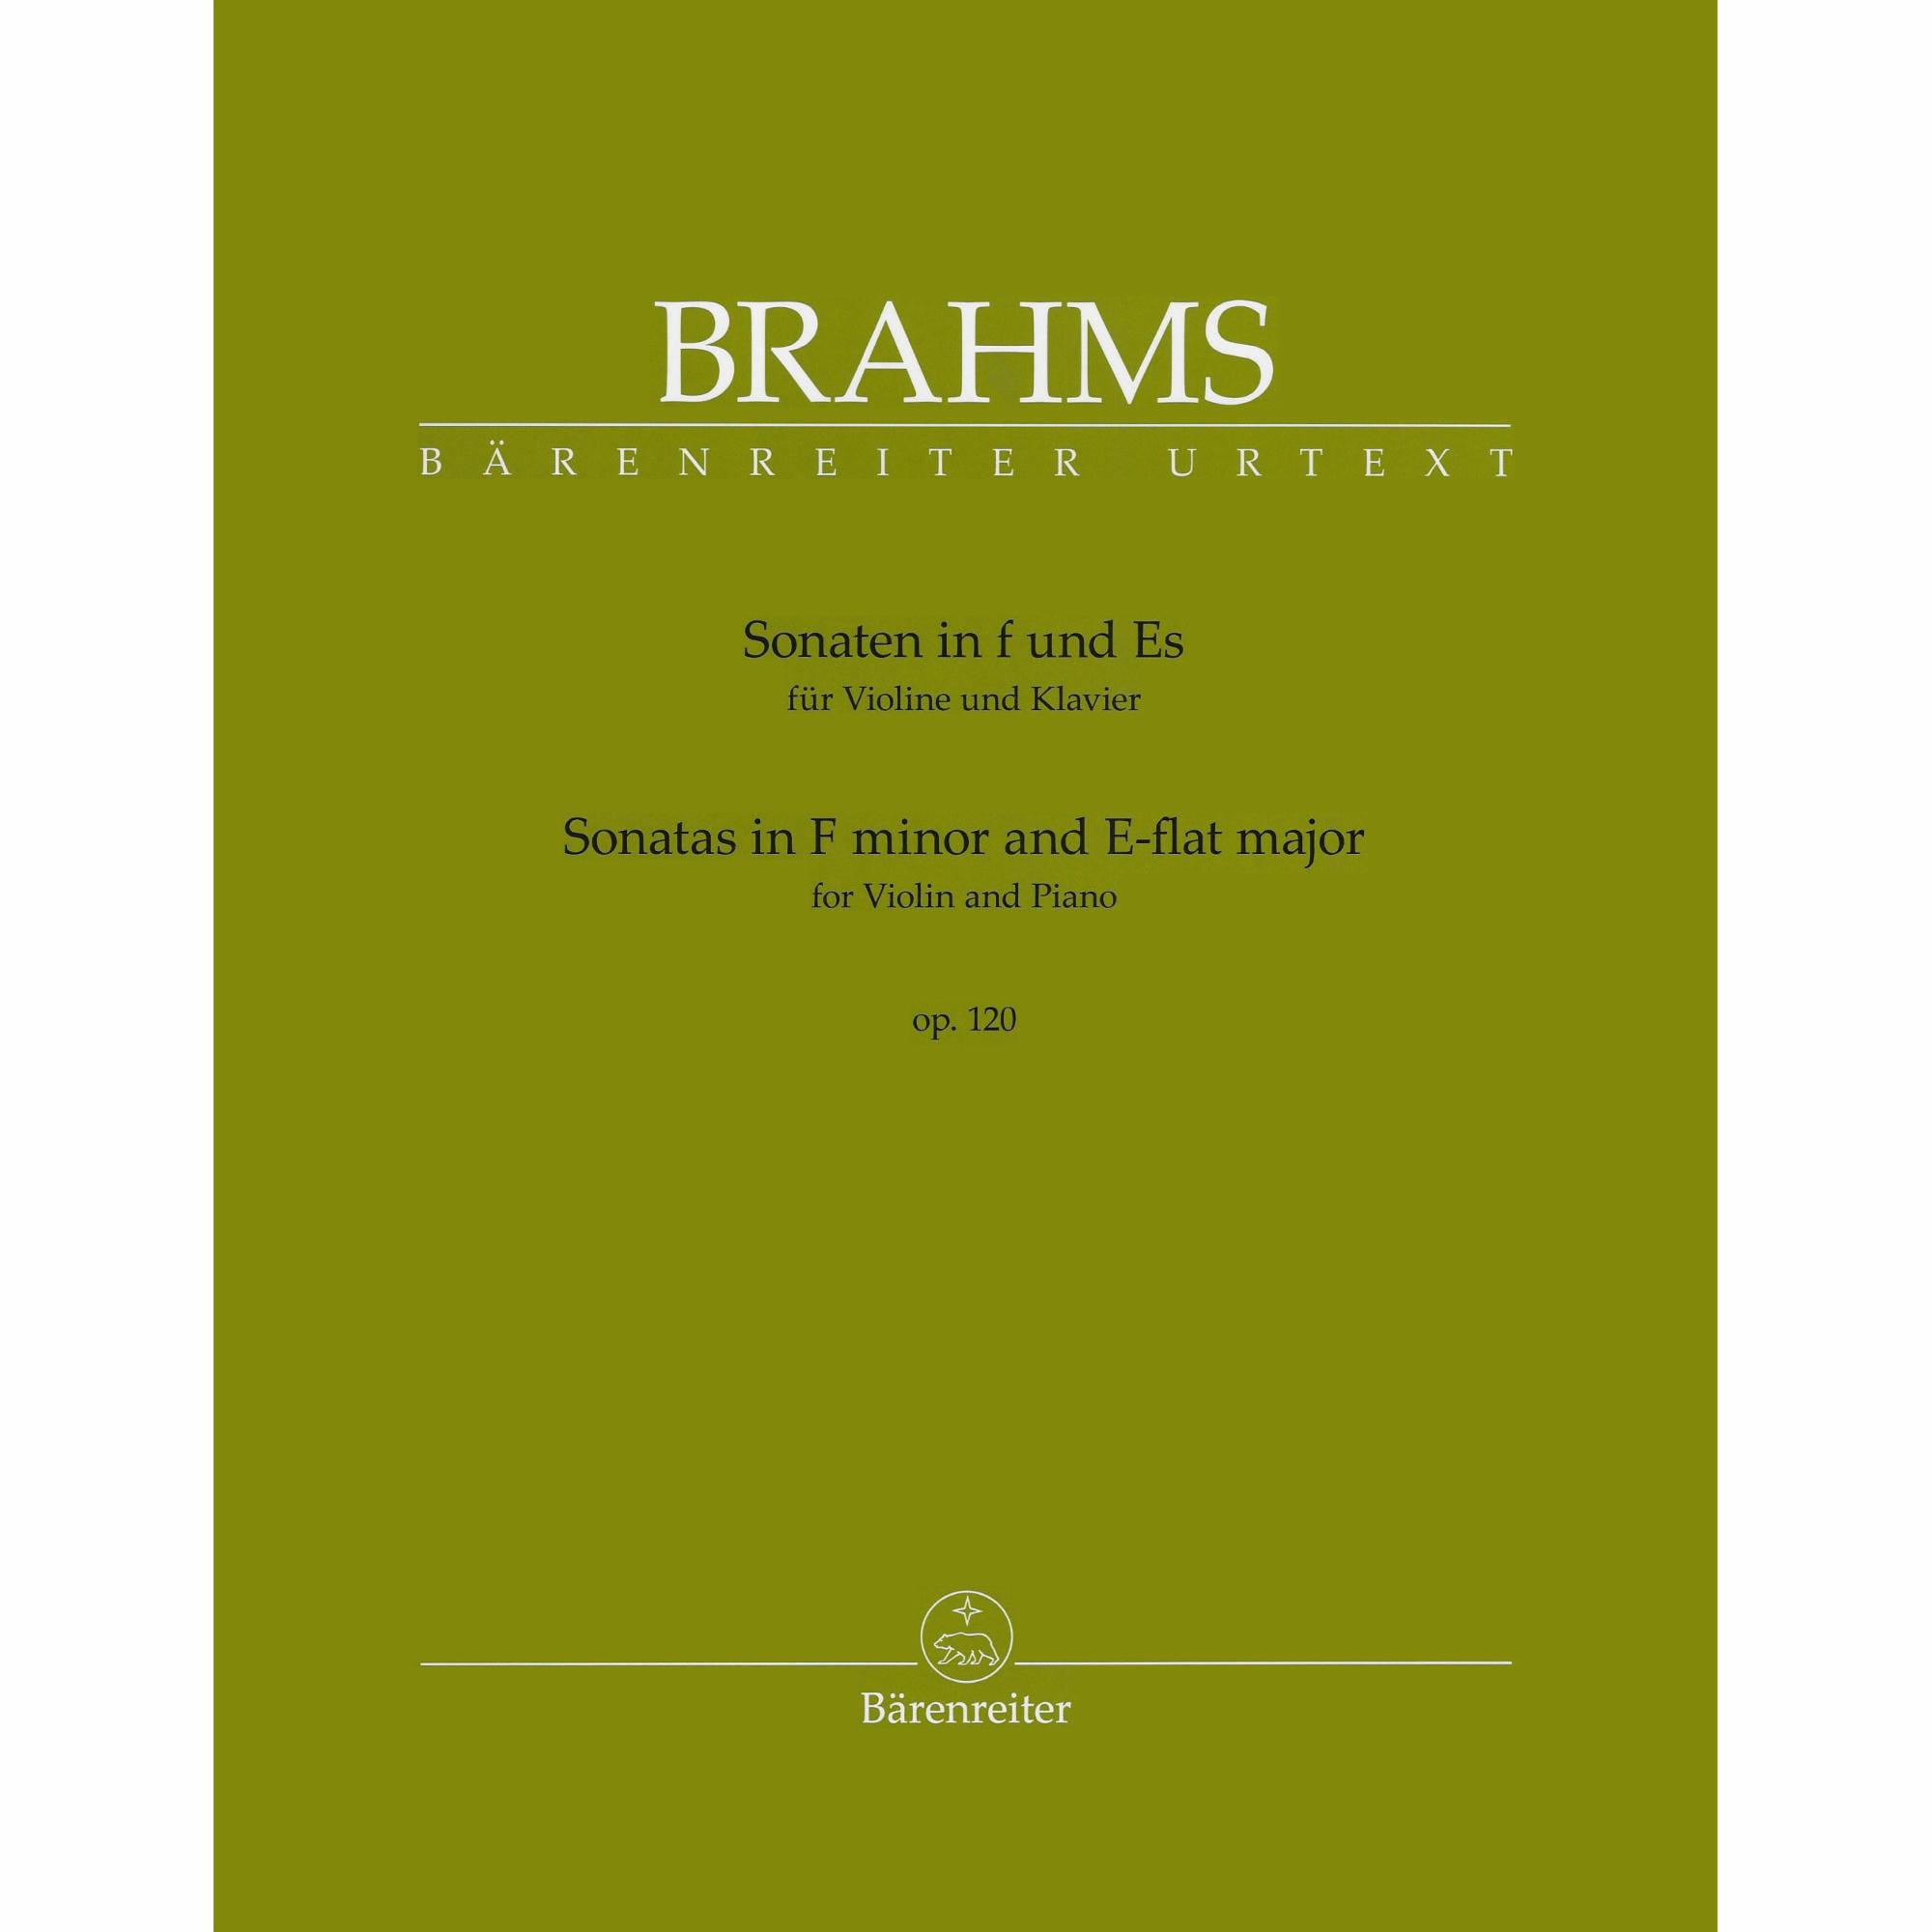 Brahms -- Sonatas in F Minor and E-flat Major, Op. 120 for Violin and Piano